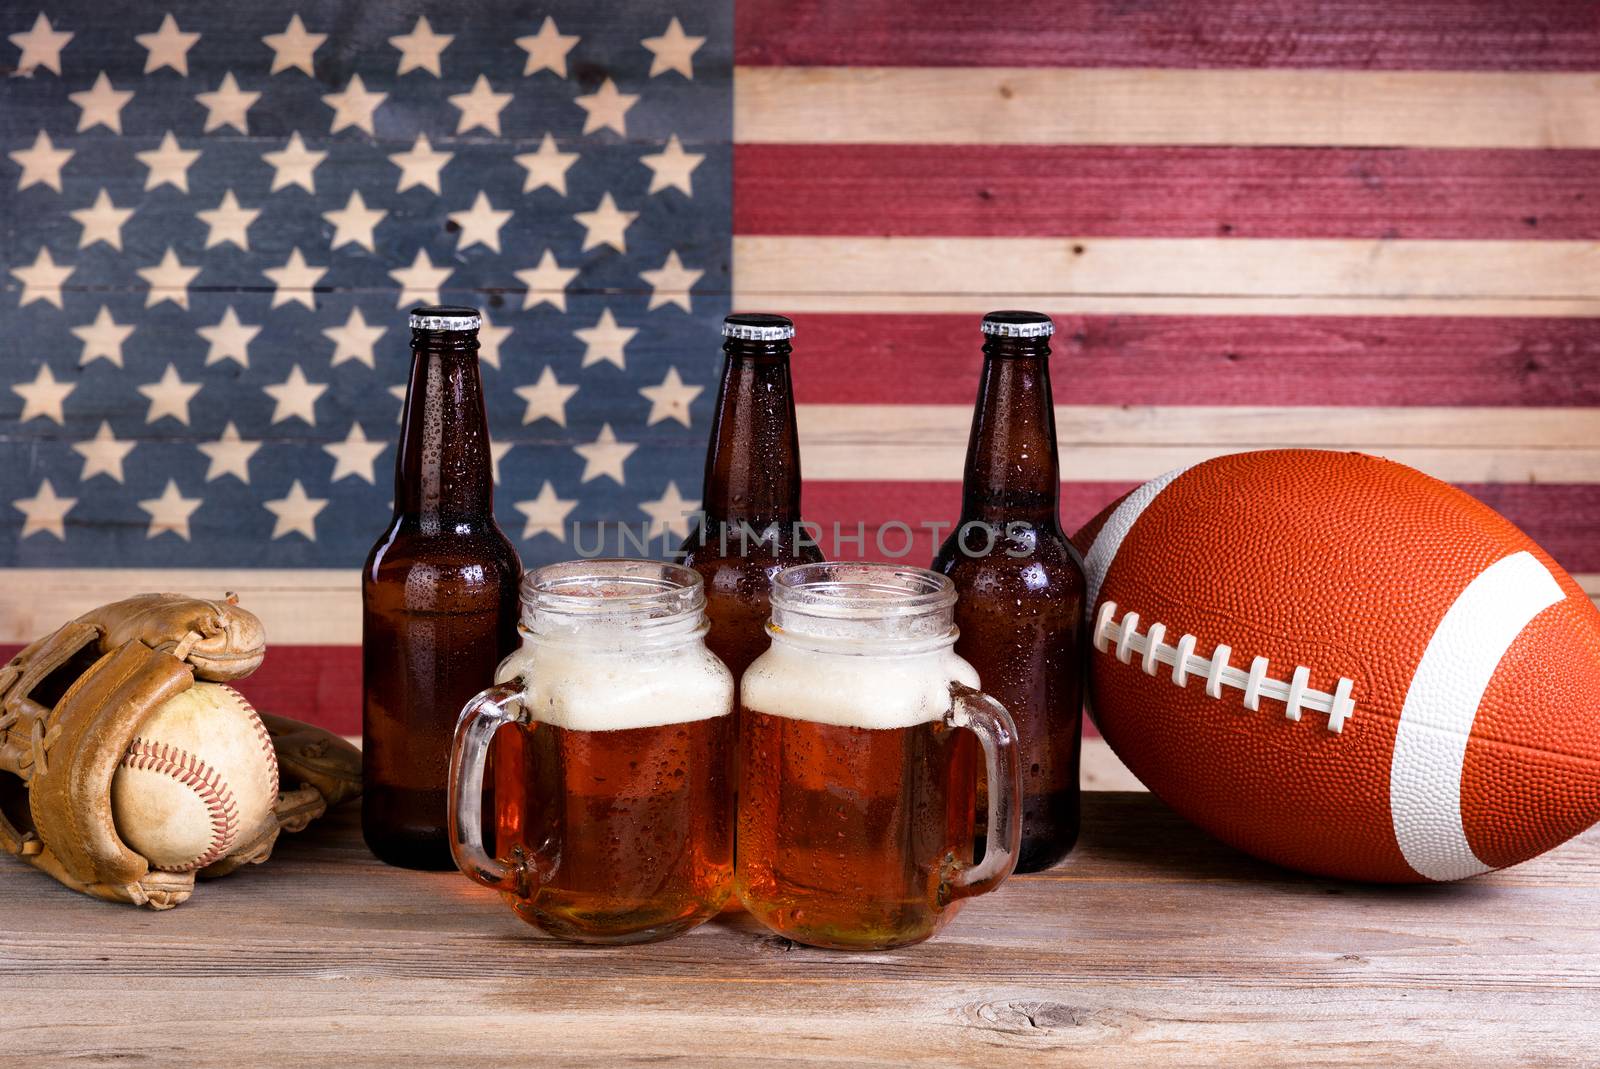 Two pint jars filled with beer, full bottles, football and baseball mitt with vintage wooden USA flag in background.